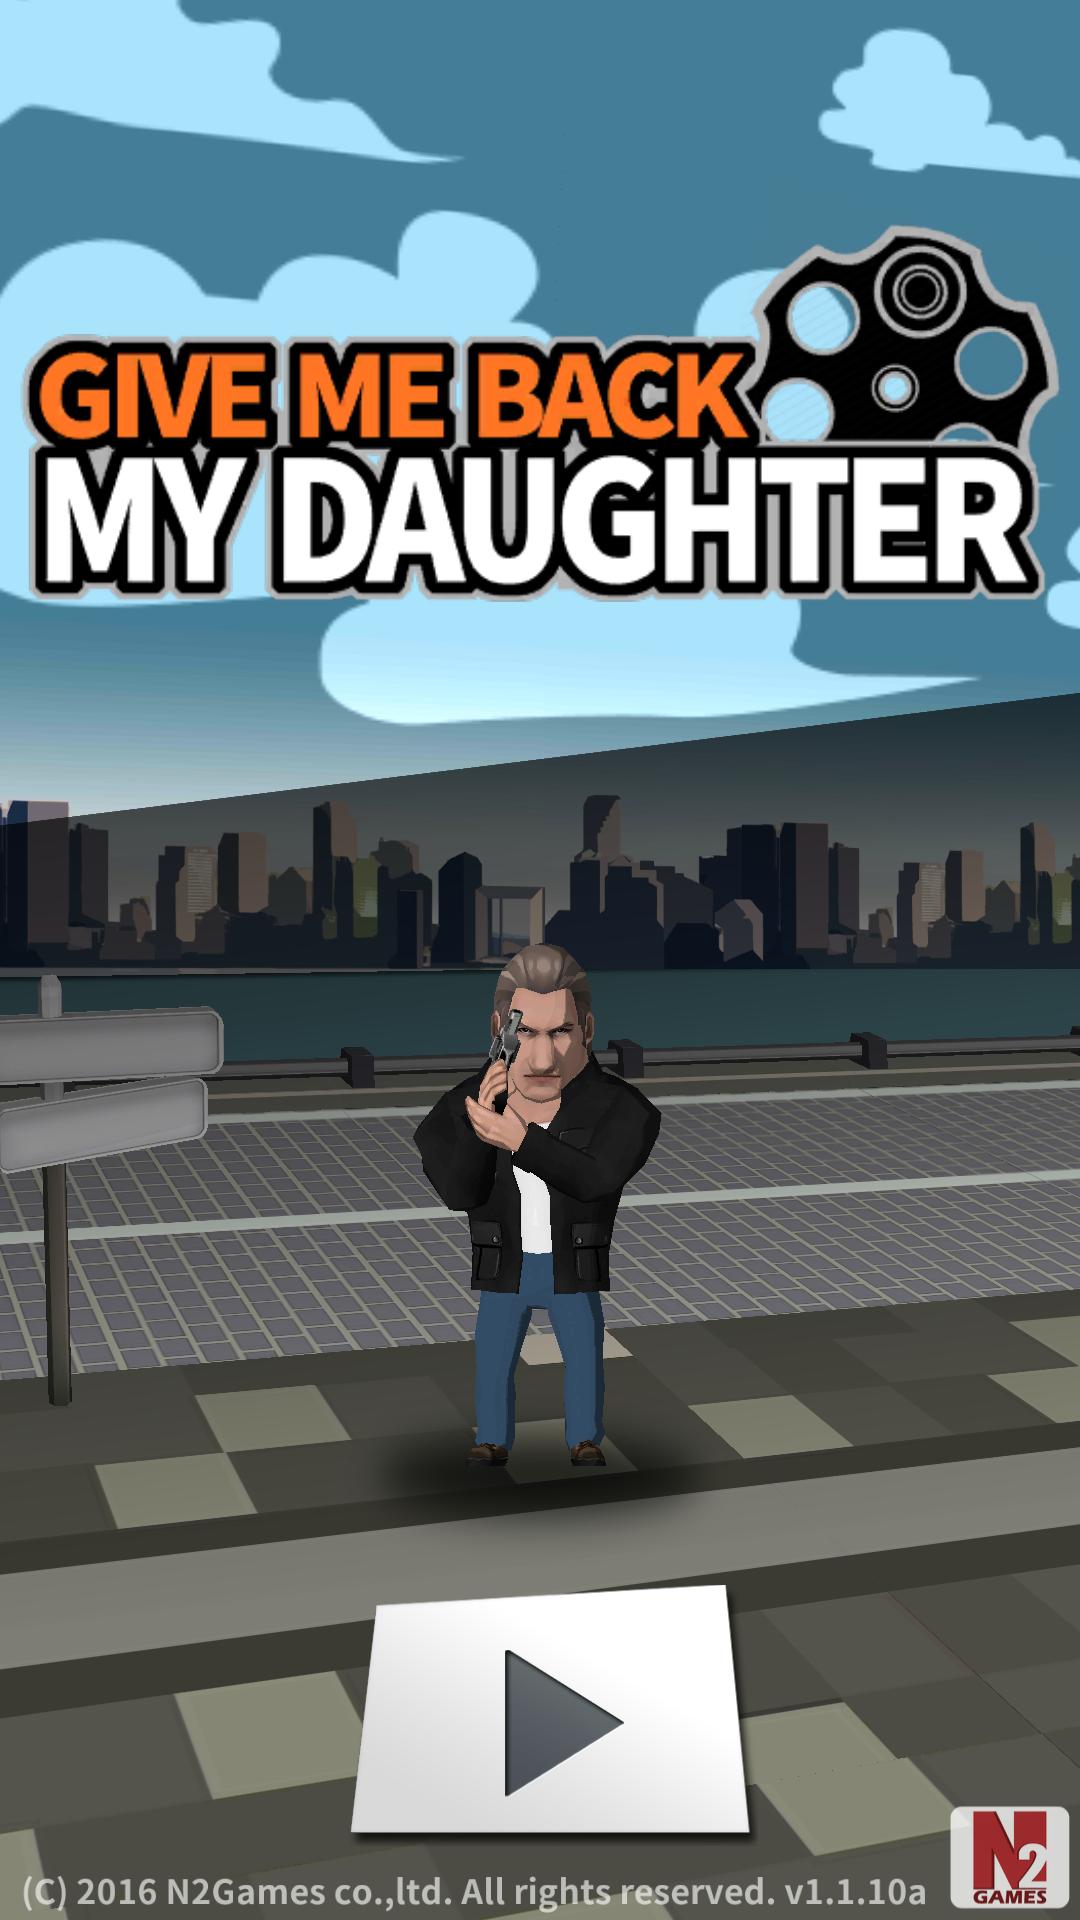 Daughter на андроид. Give my daughter back.